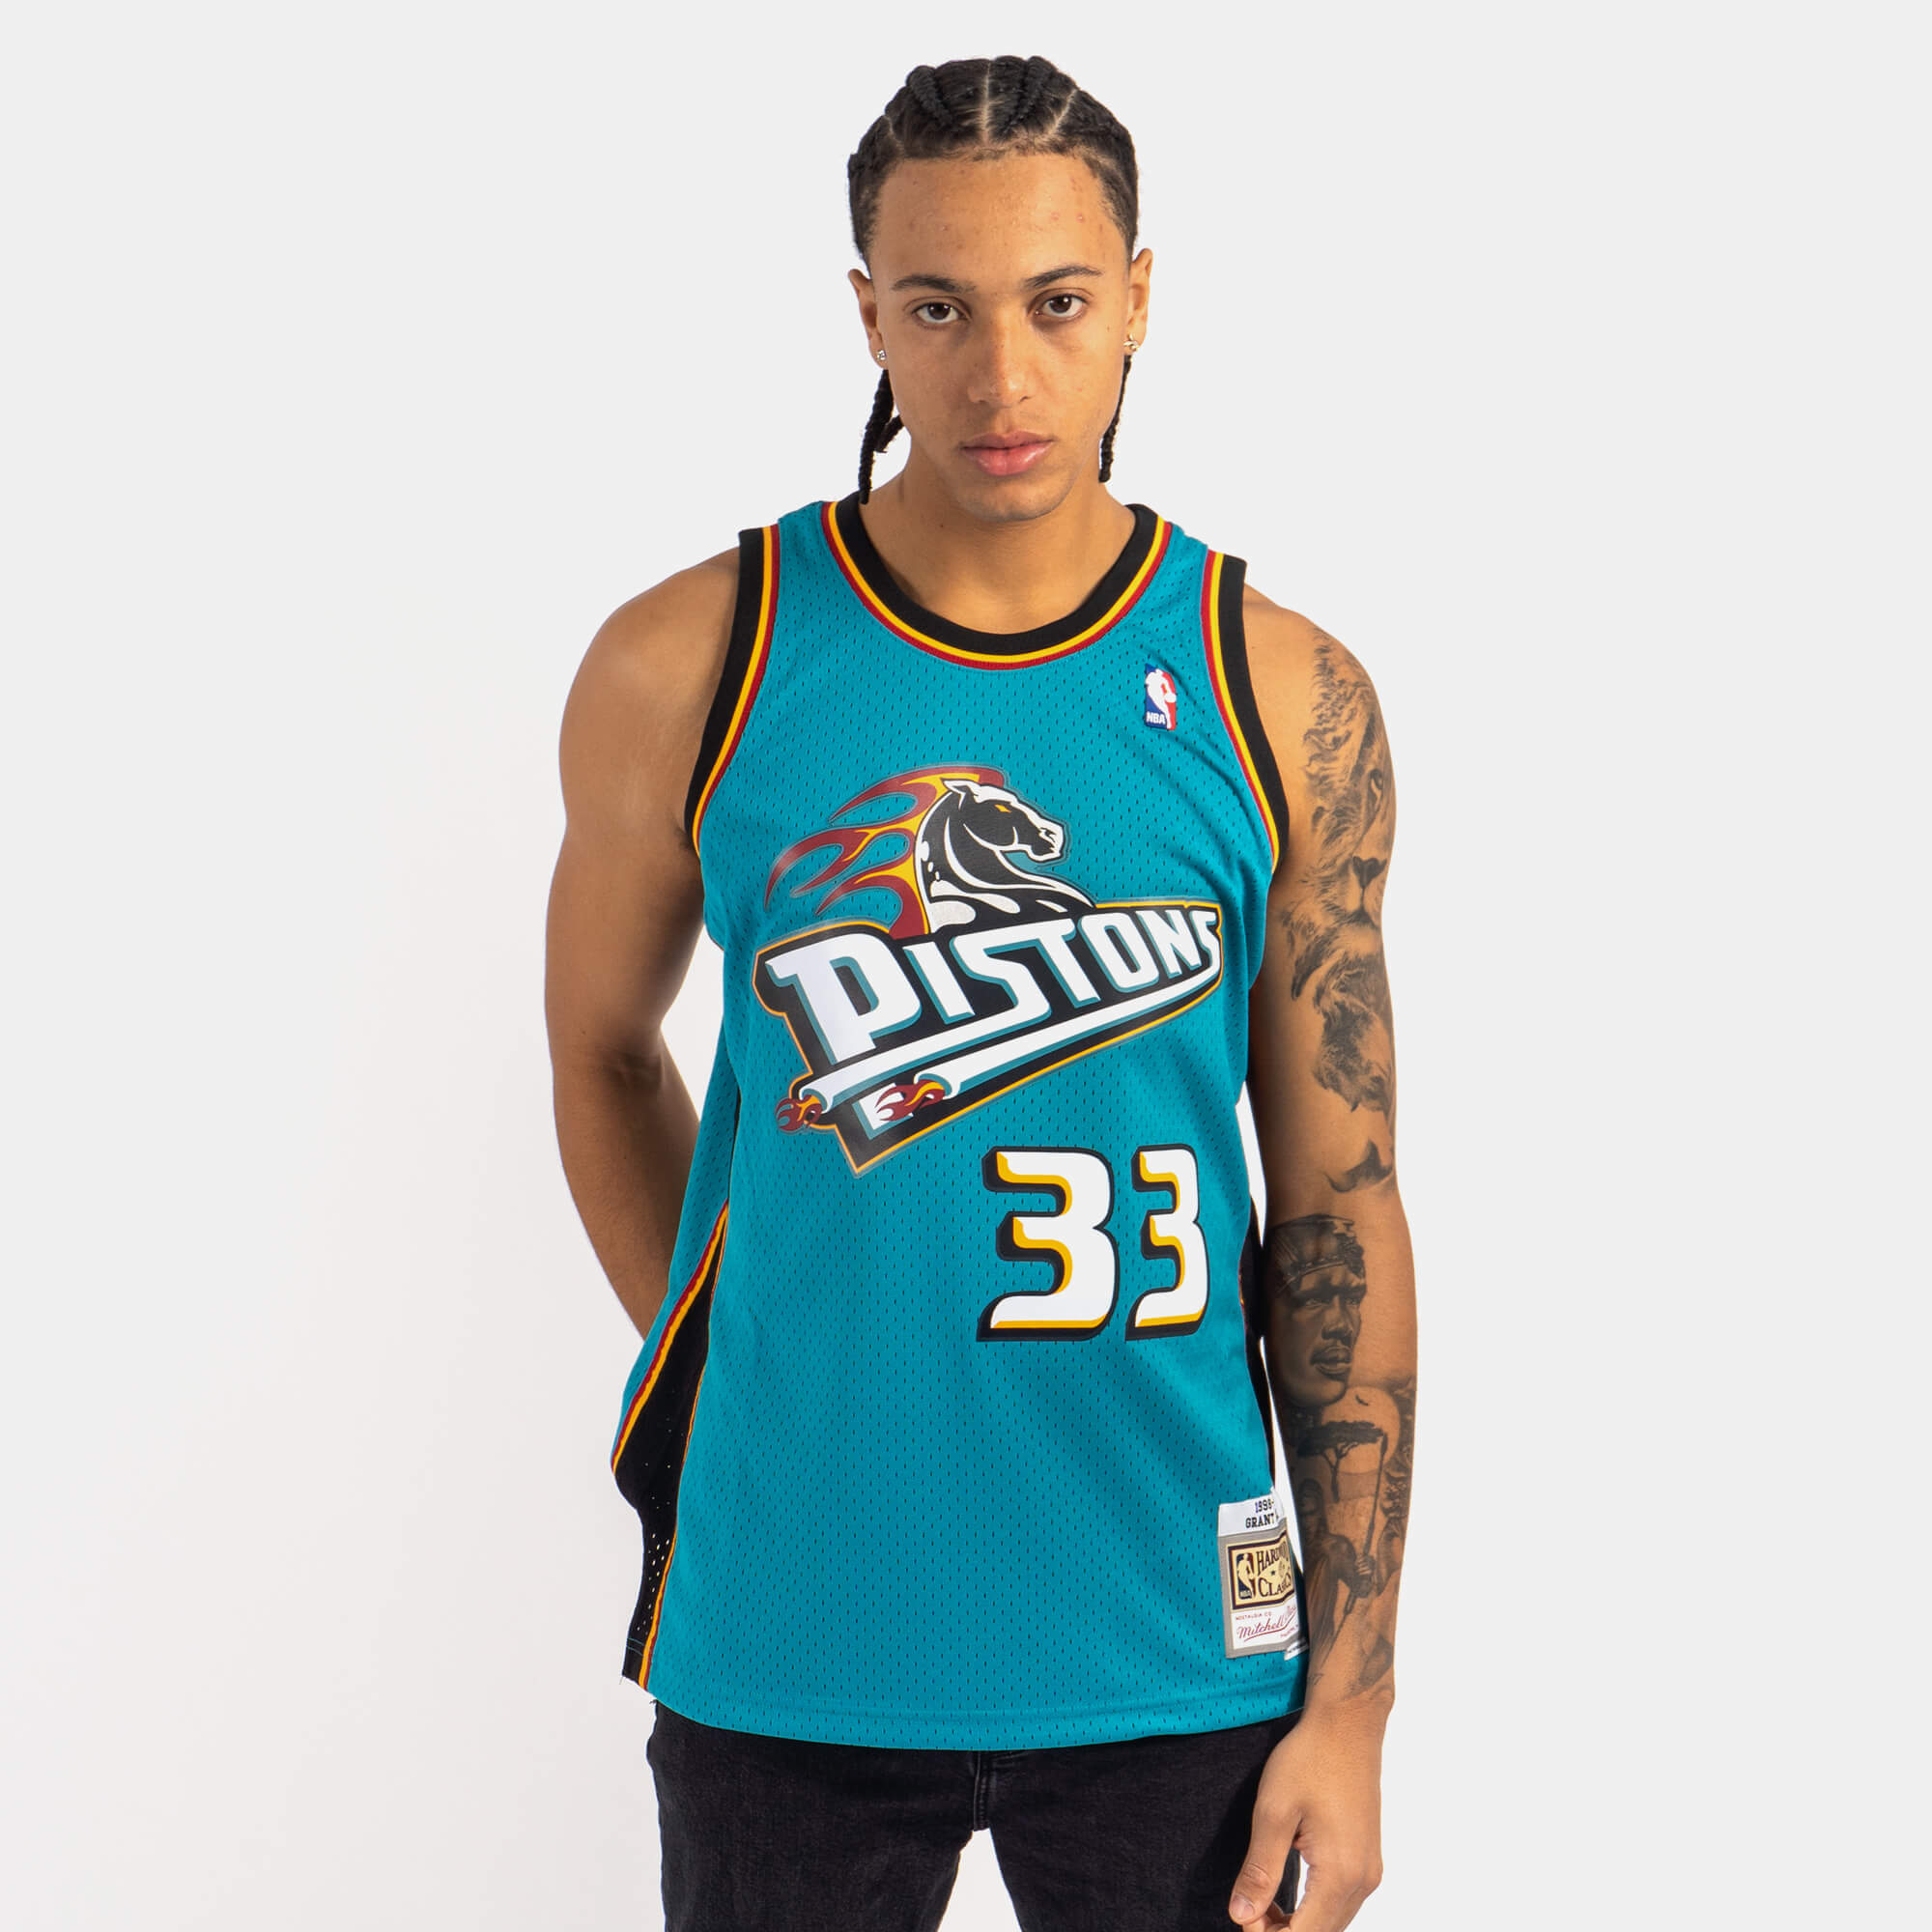 Mitchell & Ness Grant Hill Detroit Pistons NBA Throwback Jersey - Teal